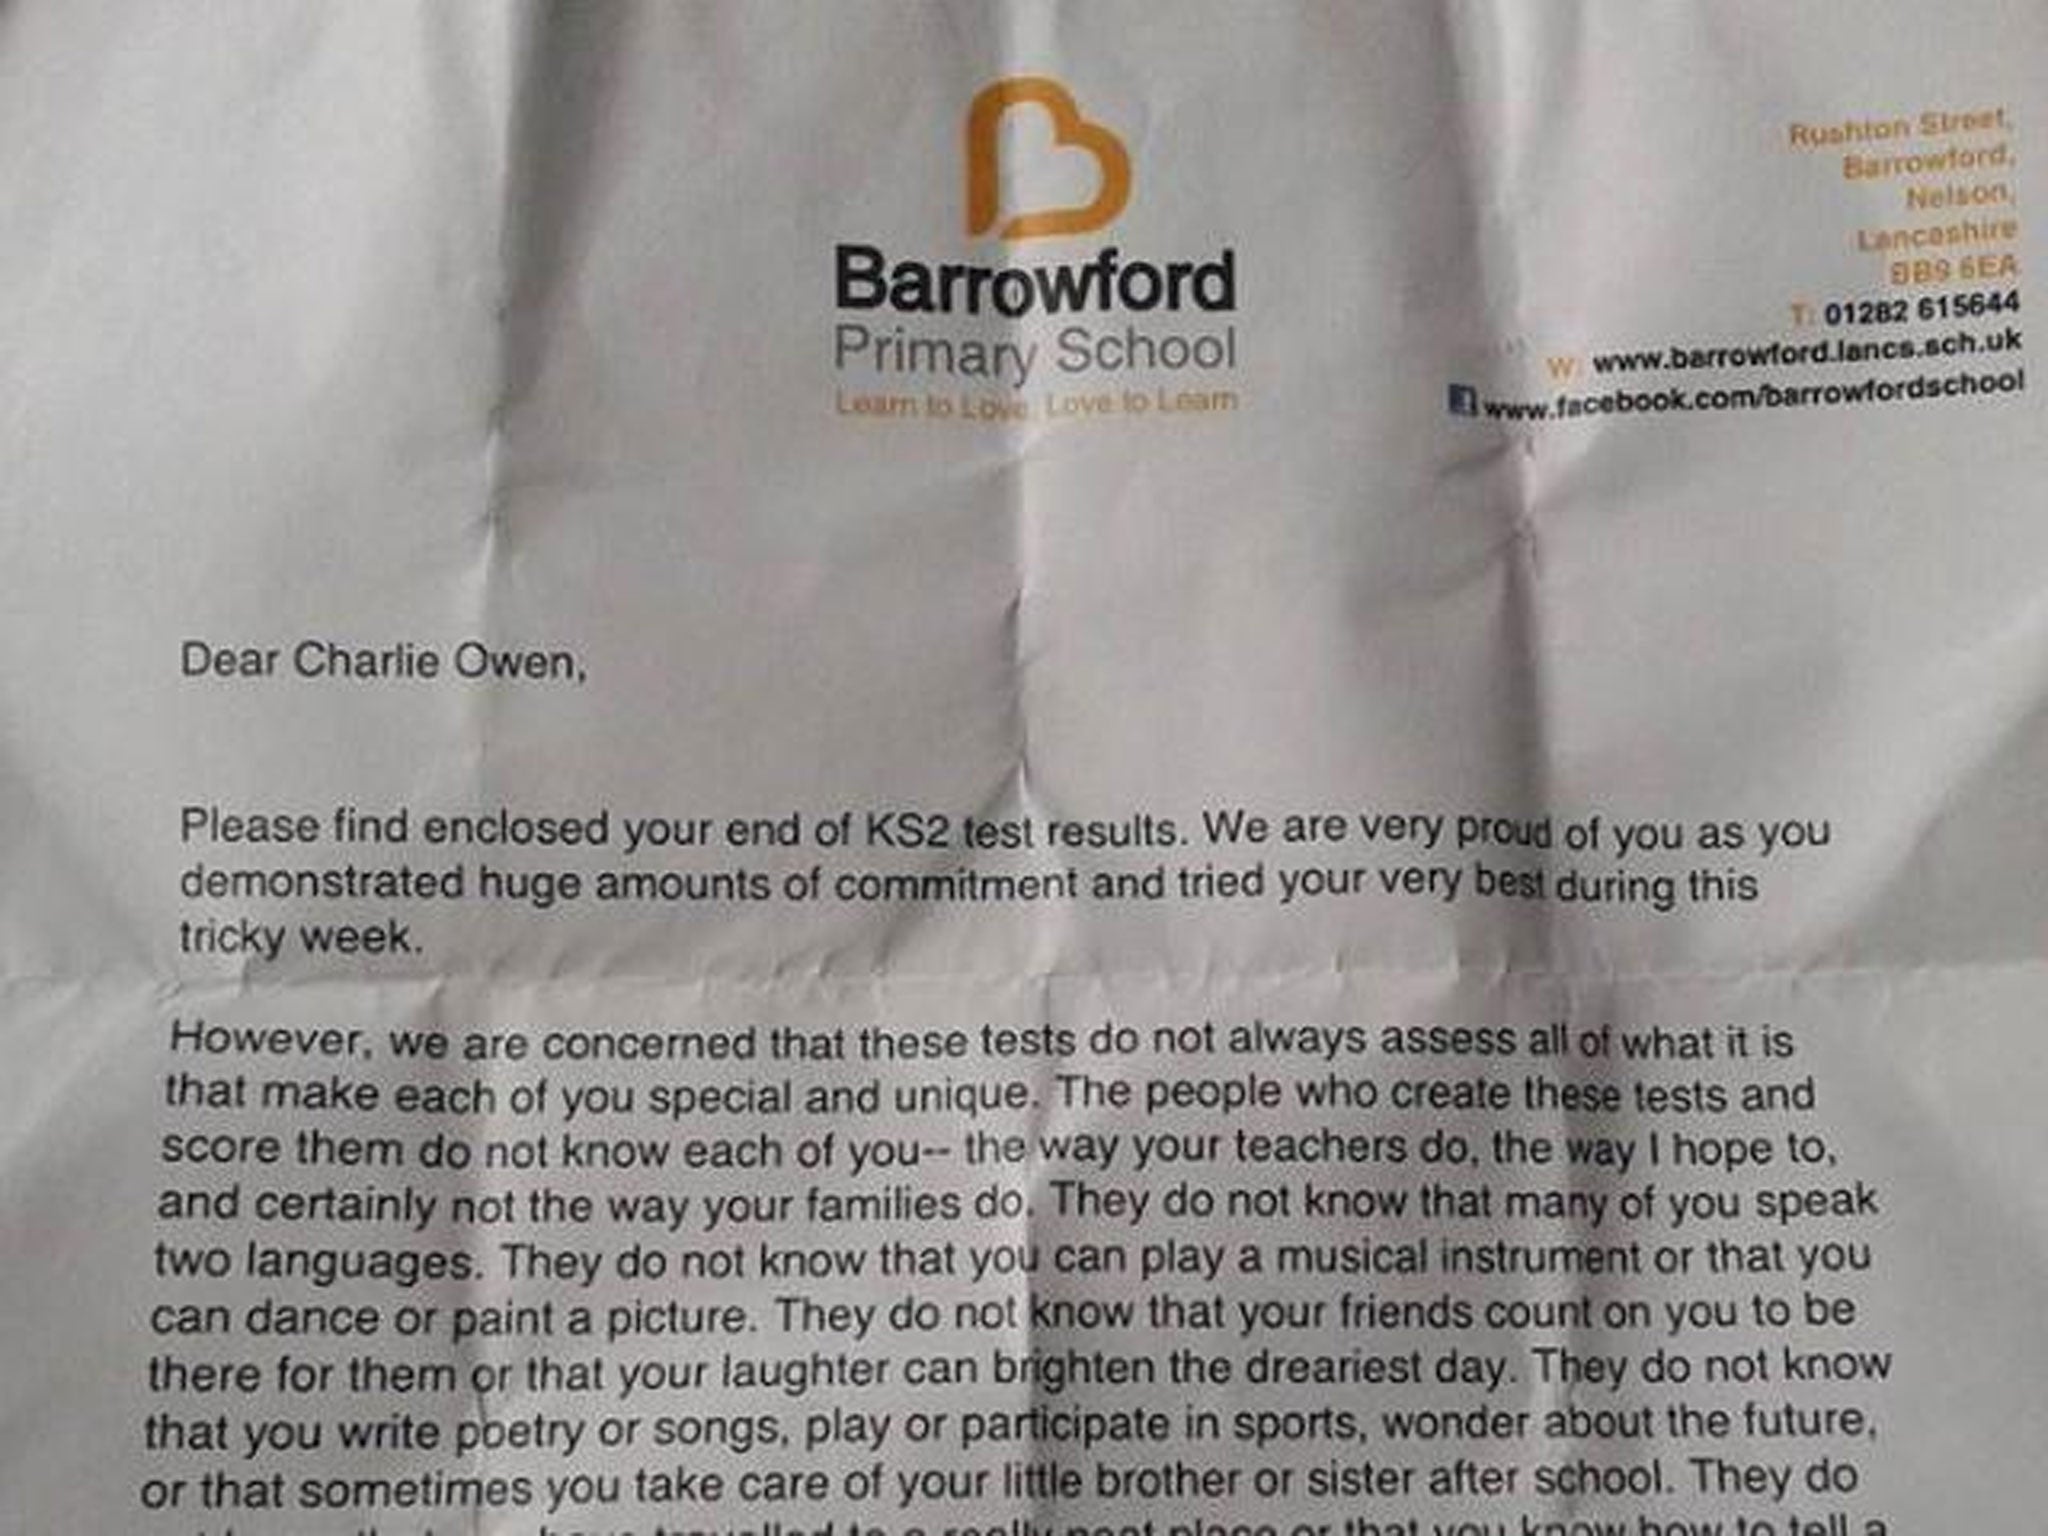 This letter was sent to pupils at Barrowford Primary School in Lancashire along with their Key Stage Two results